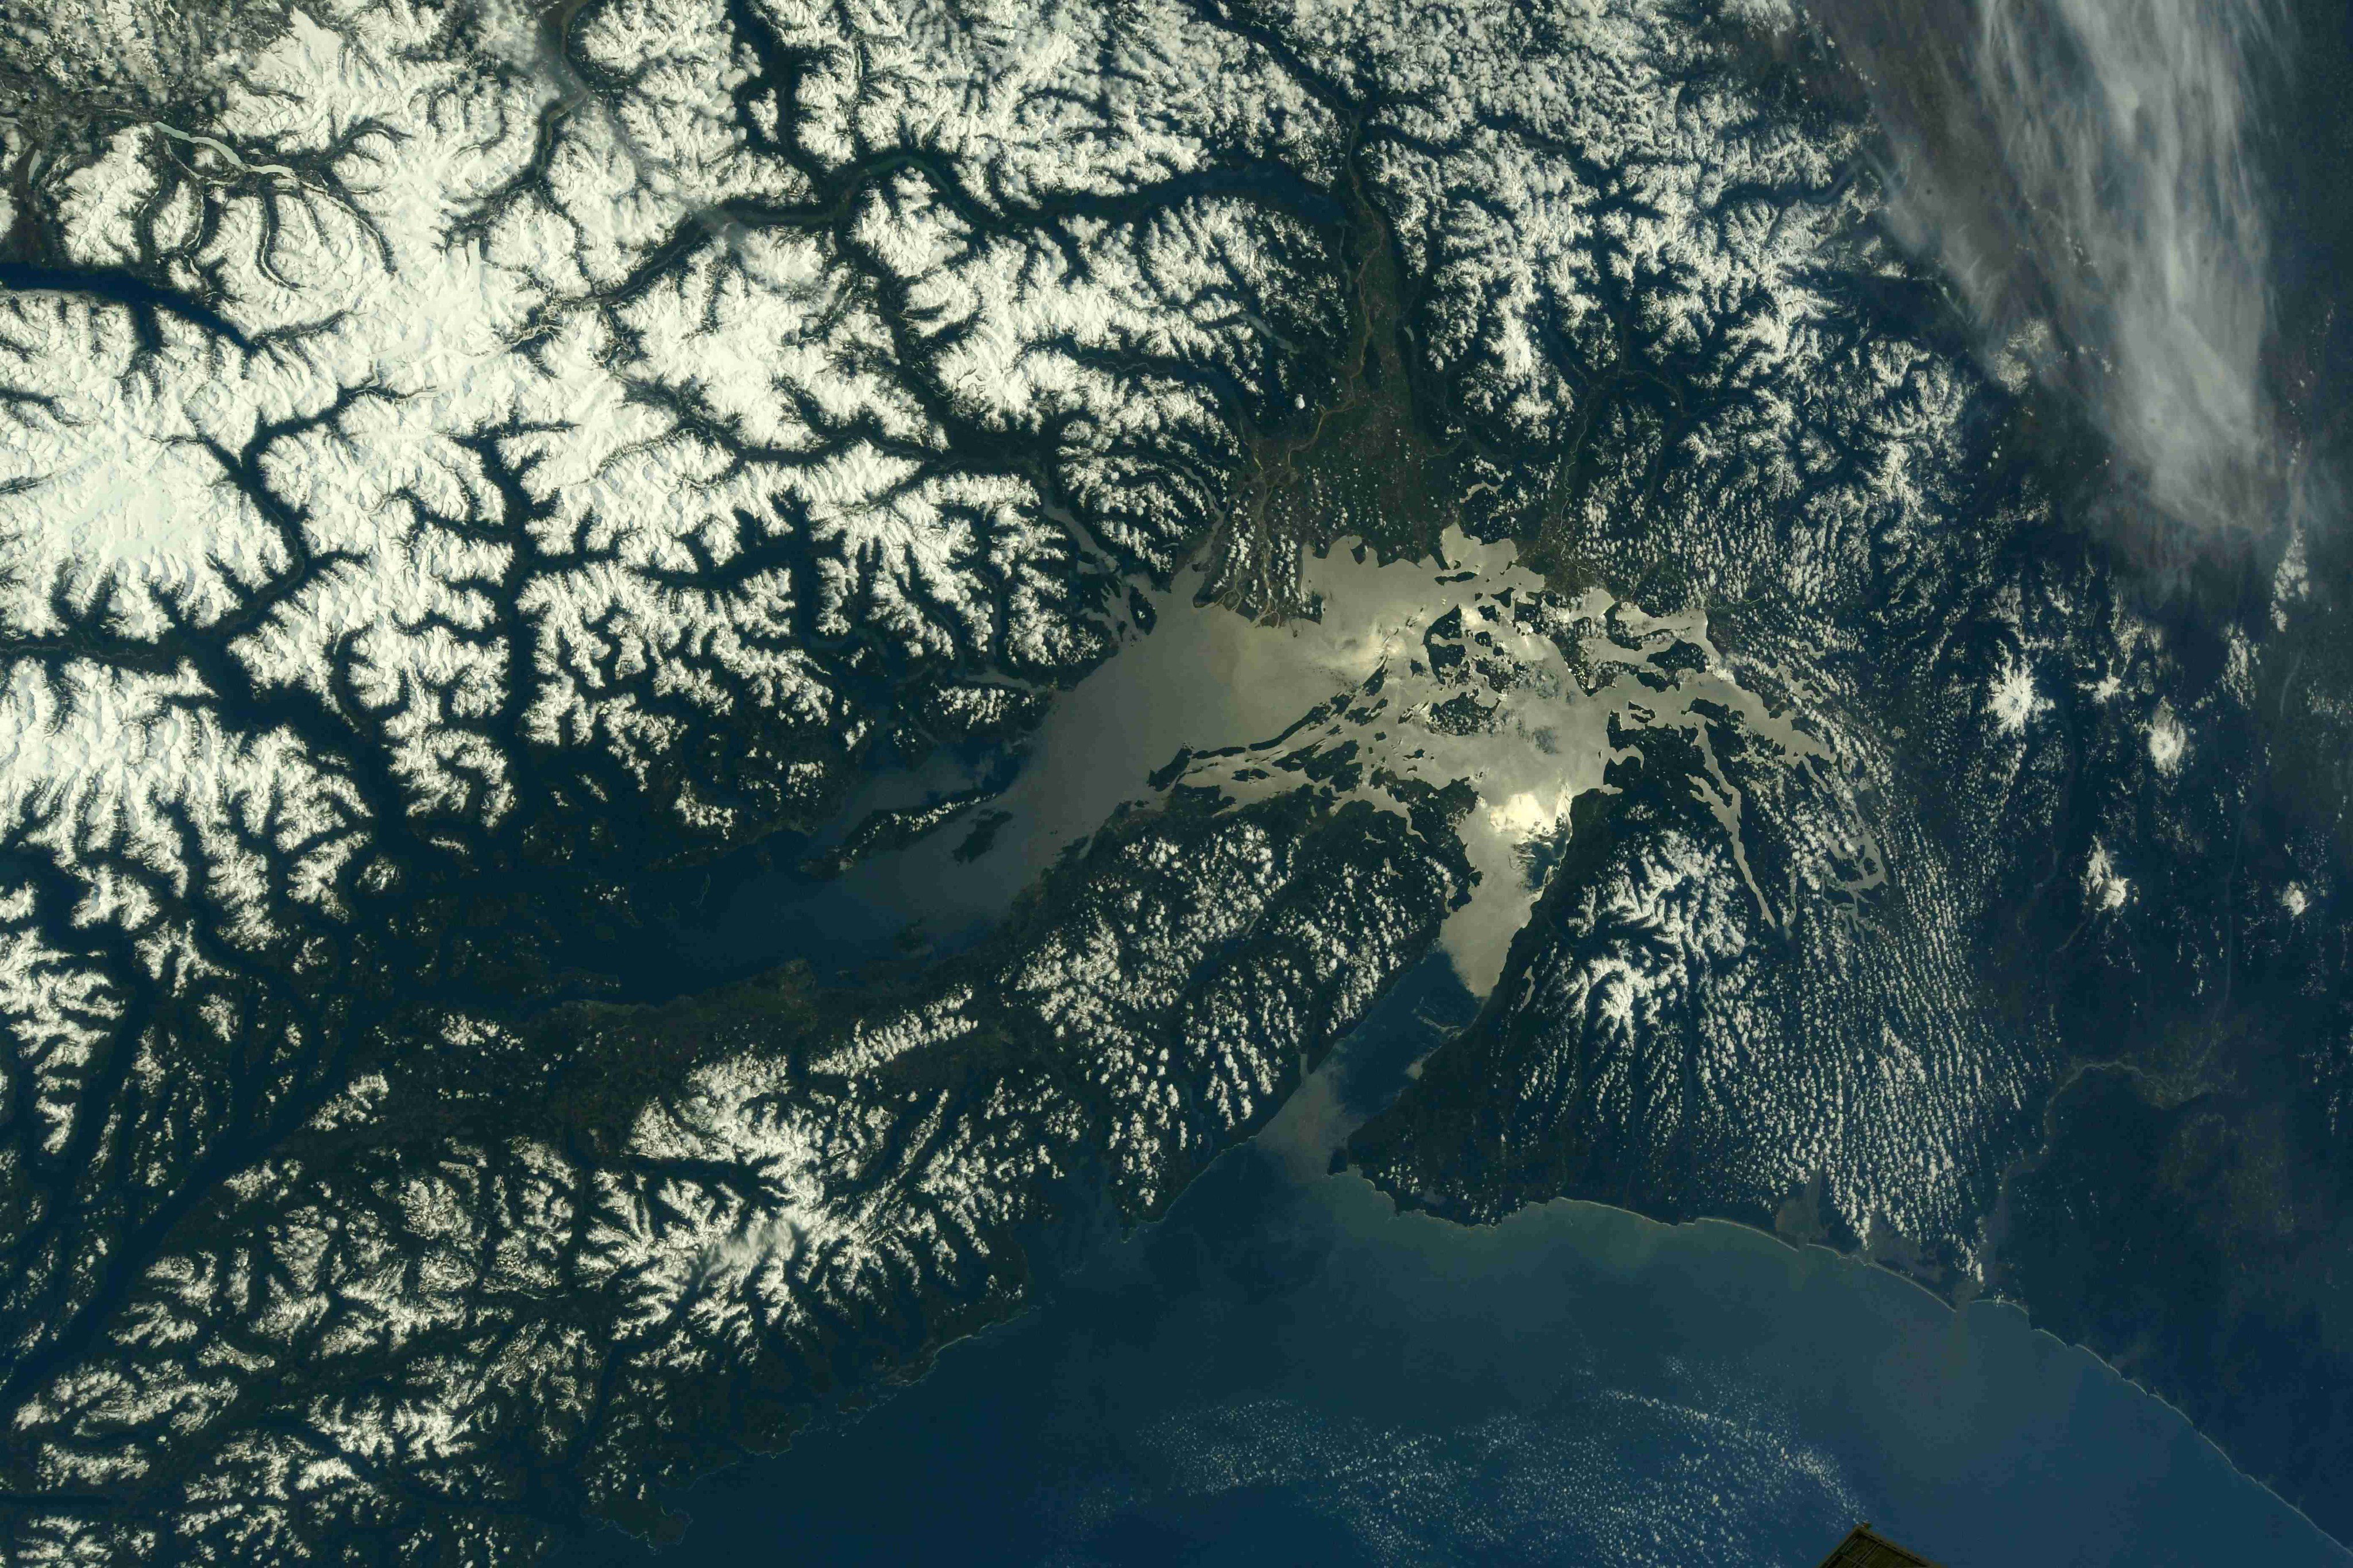 Celebrating National Park Week With a View of Mount Rainier | NASA